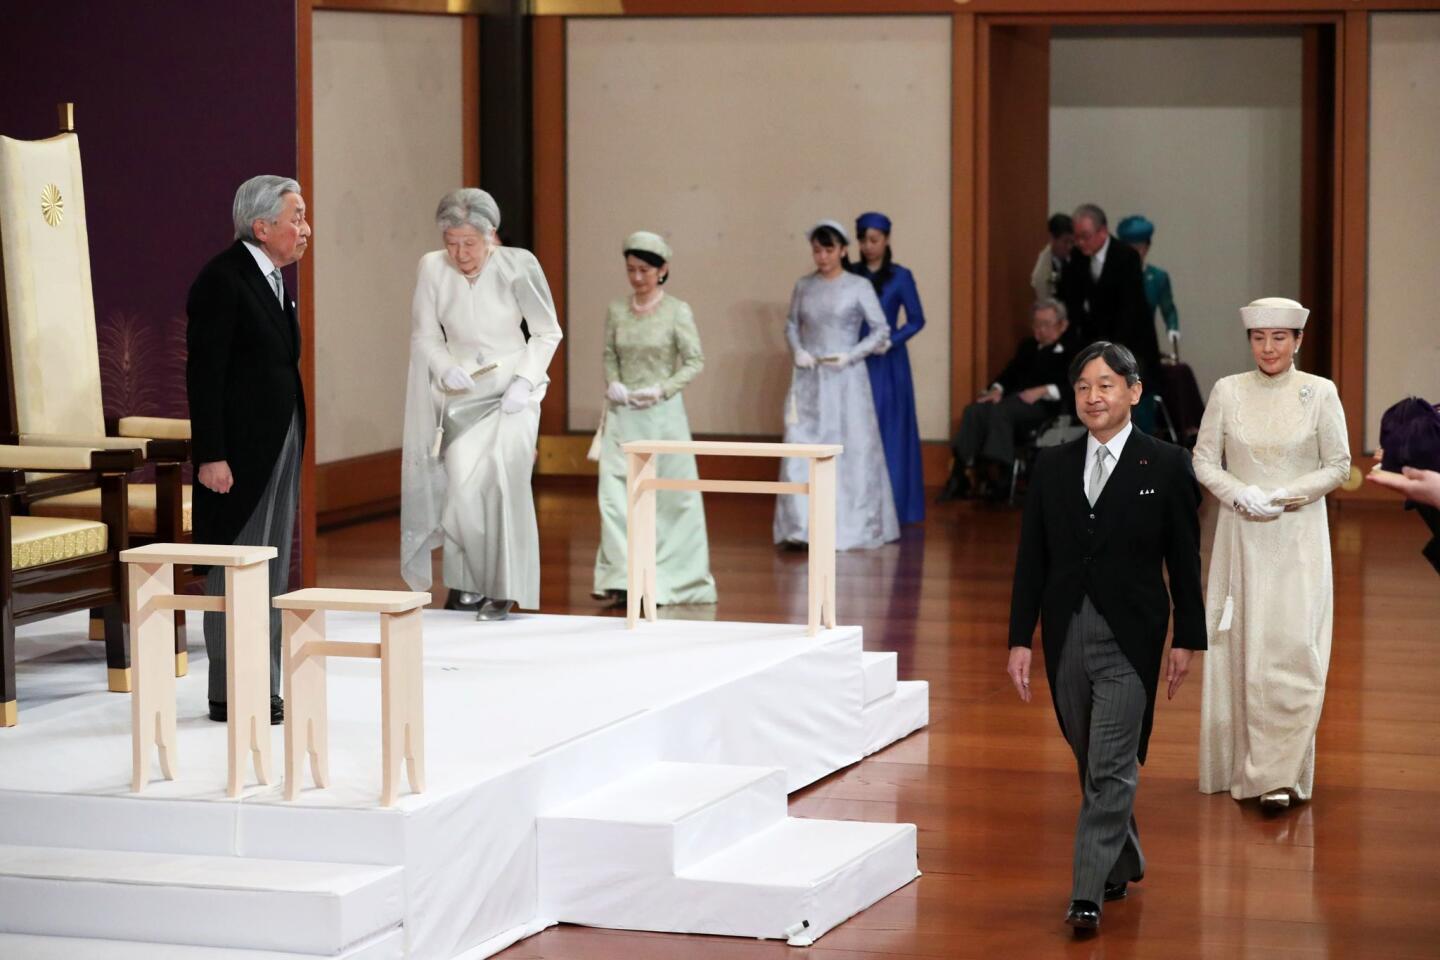 Japanese Emperor Akihito, left, and his wife, Empress Michiko, second from left, are joined by Crown Prince Naruhito, second from right, and his wife, Crown Princess Masako, right, and other members of the royal familily inside the Matsu-no-Ma state room in the Imperial Palace in Tokyo on Tuesday. Emperor Akihito has formally stepped down, the first abdication in more than 200 years in the world's oldest monarchy.